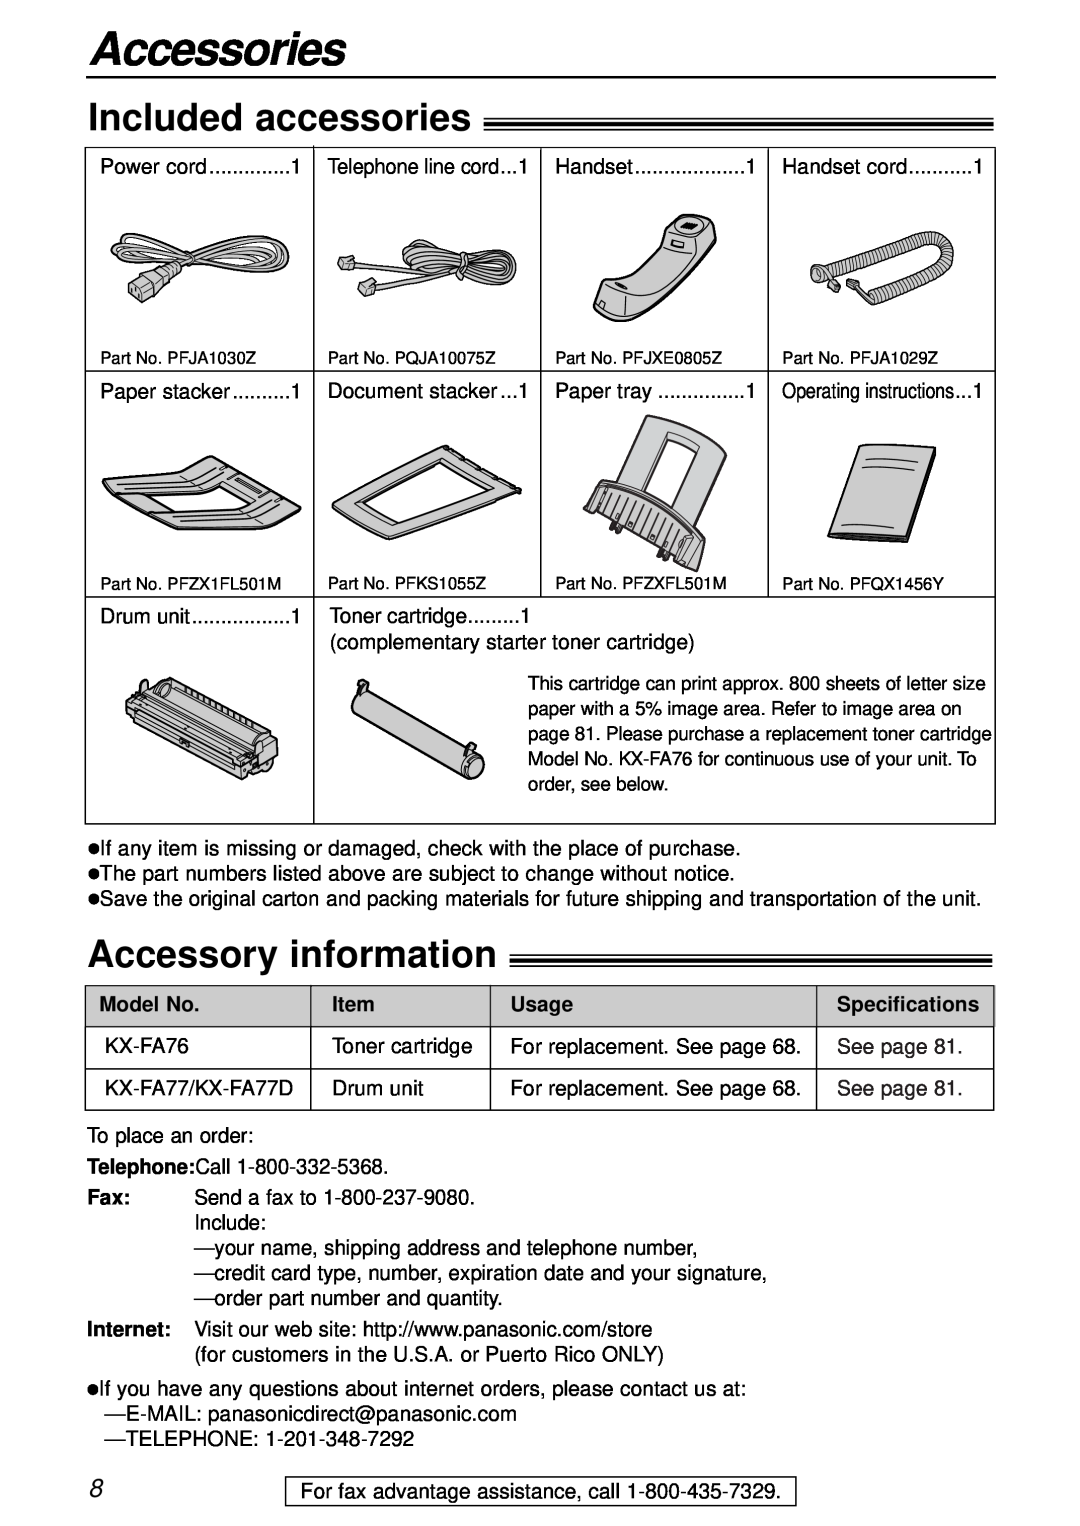 Panasonic KX-FL501 manual Accessories, Included accessories, Accessory information, Model No, Usage, Specifications 